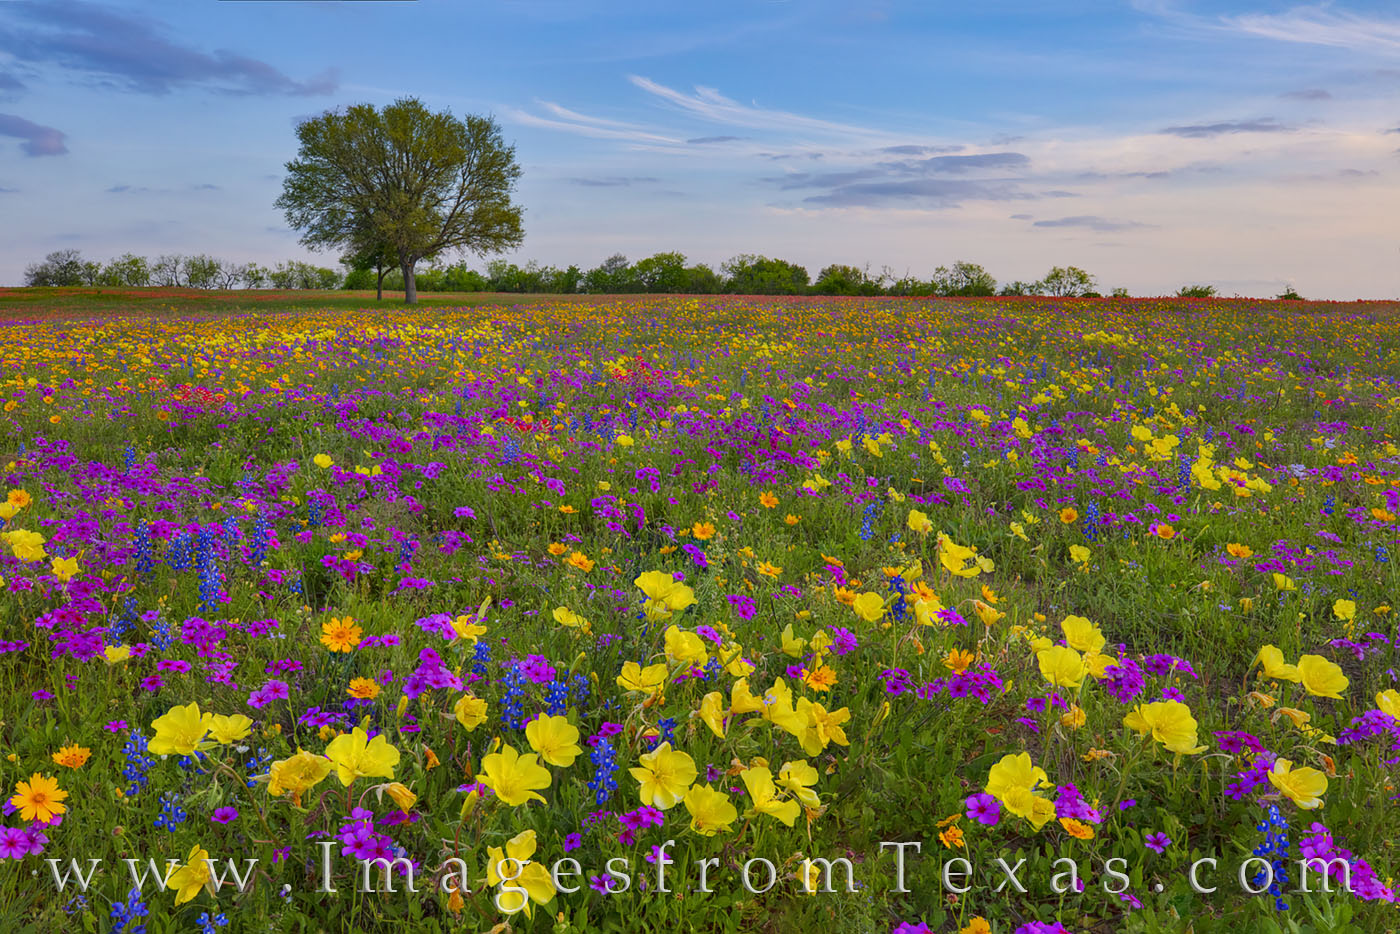 Texas wildflowers of gold, purple, blue, and red, fill a pasture east of San Antonio on a cool March evening. This spring explosion...